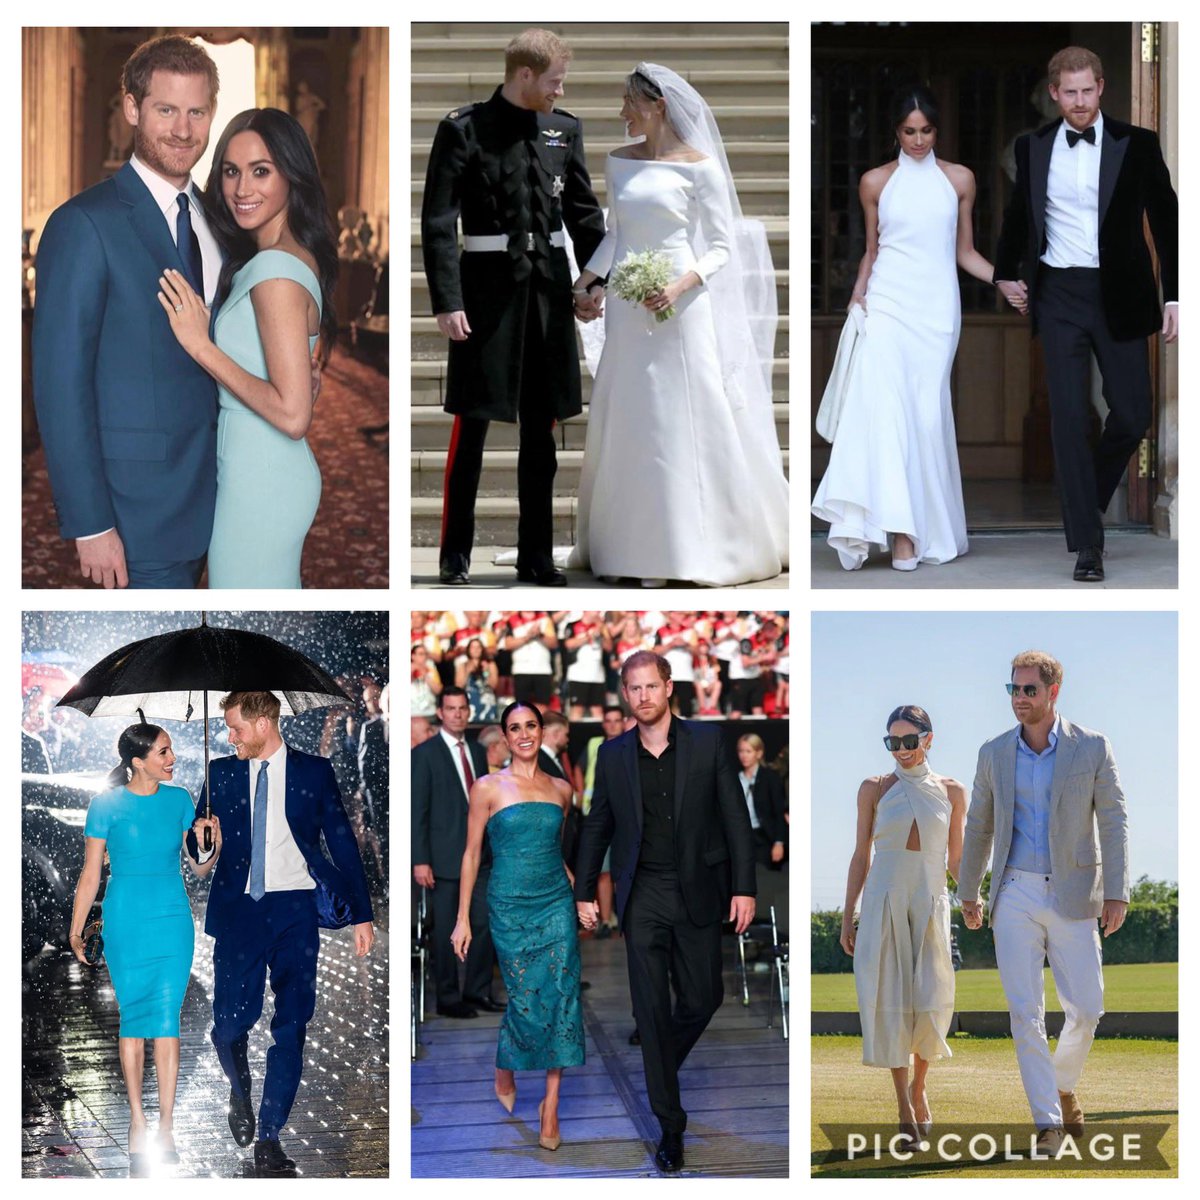 The power couple’s iconic pictures. 
#WeloveyouHarryandMeghan  #Sussex